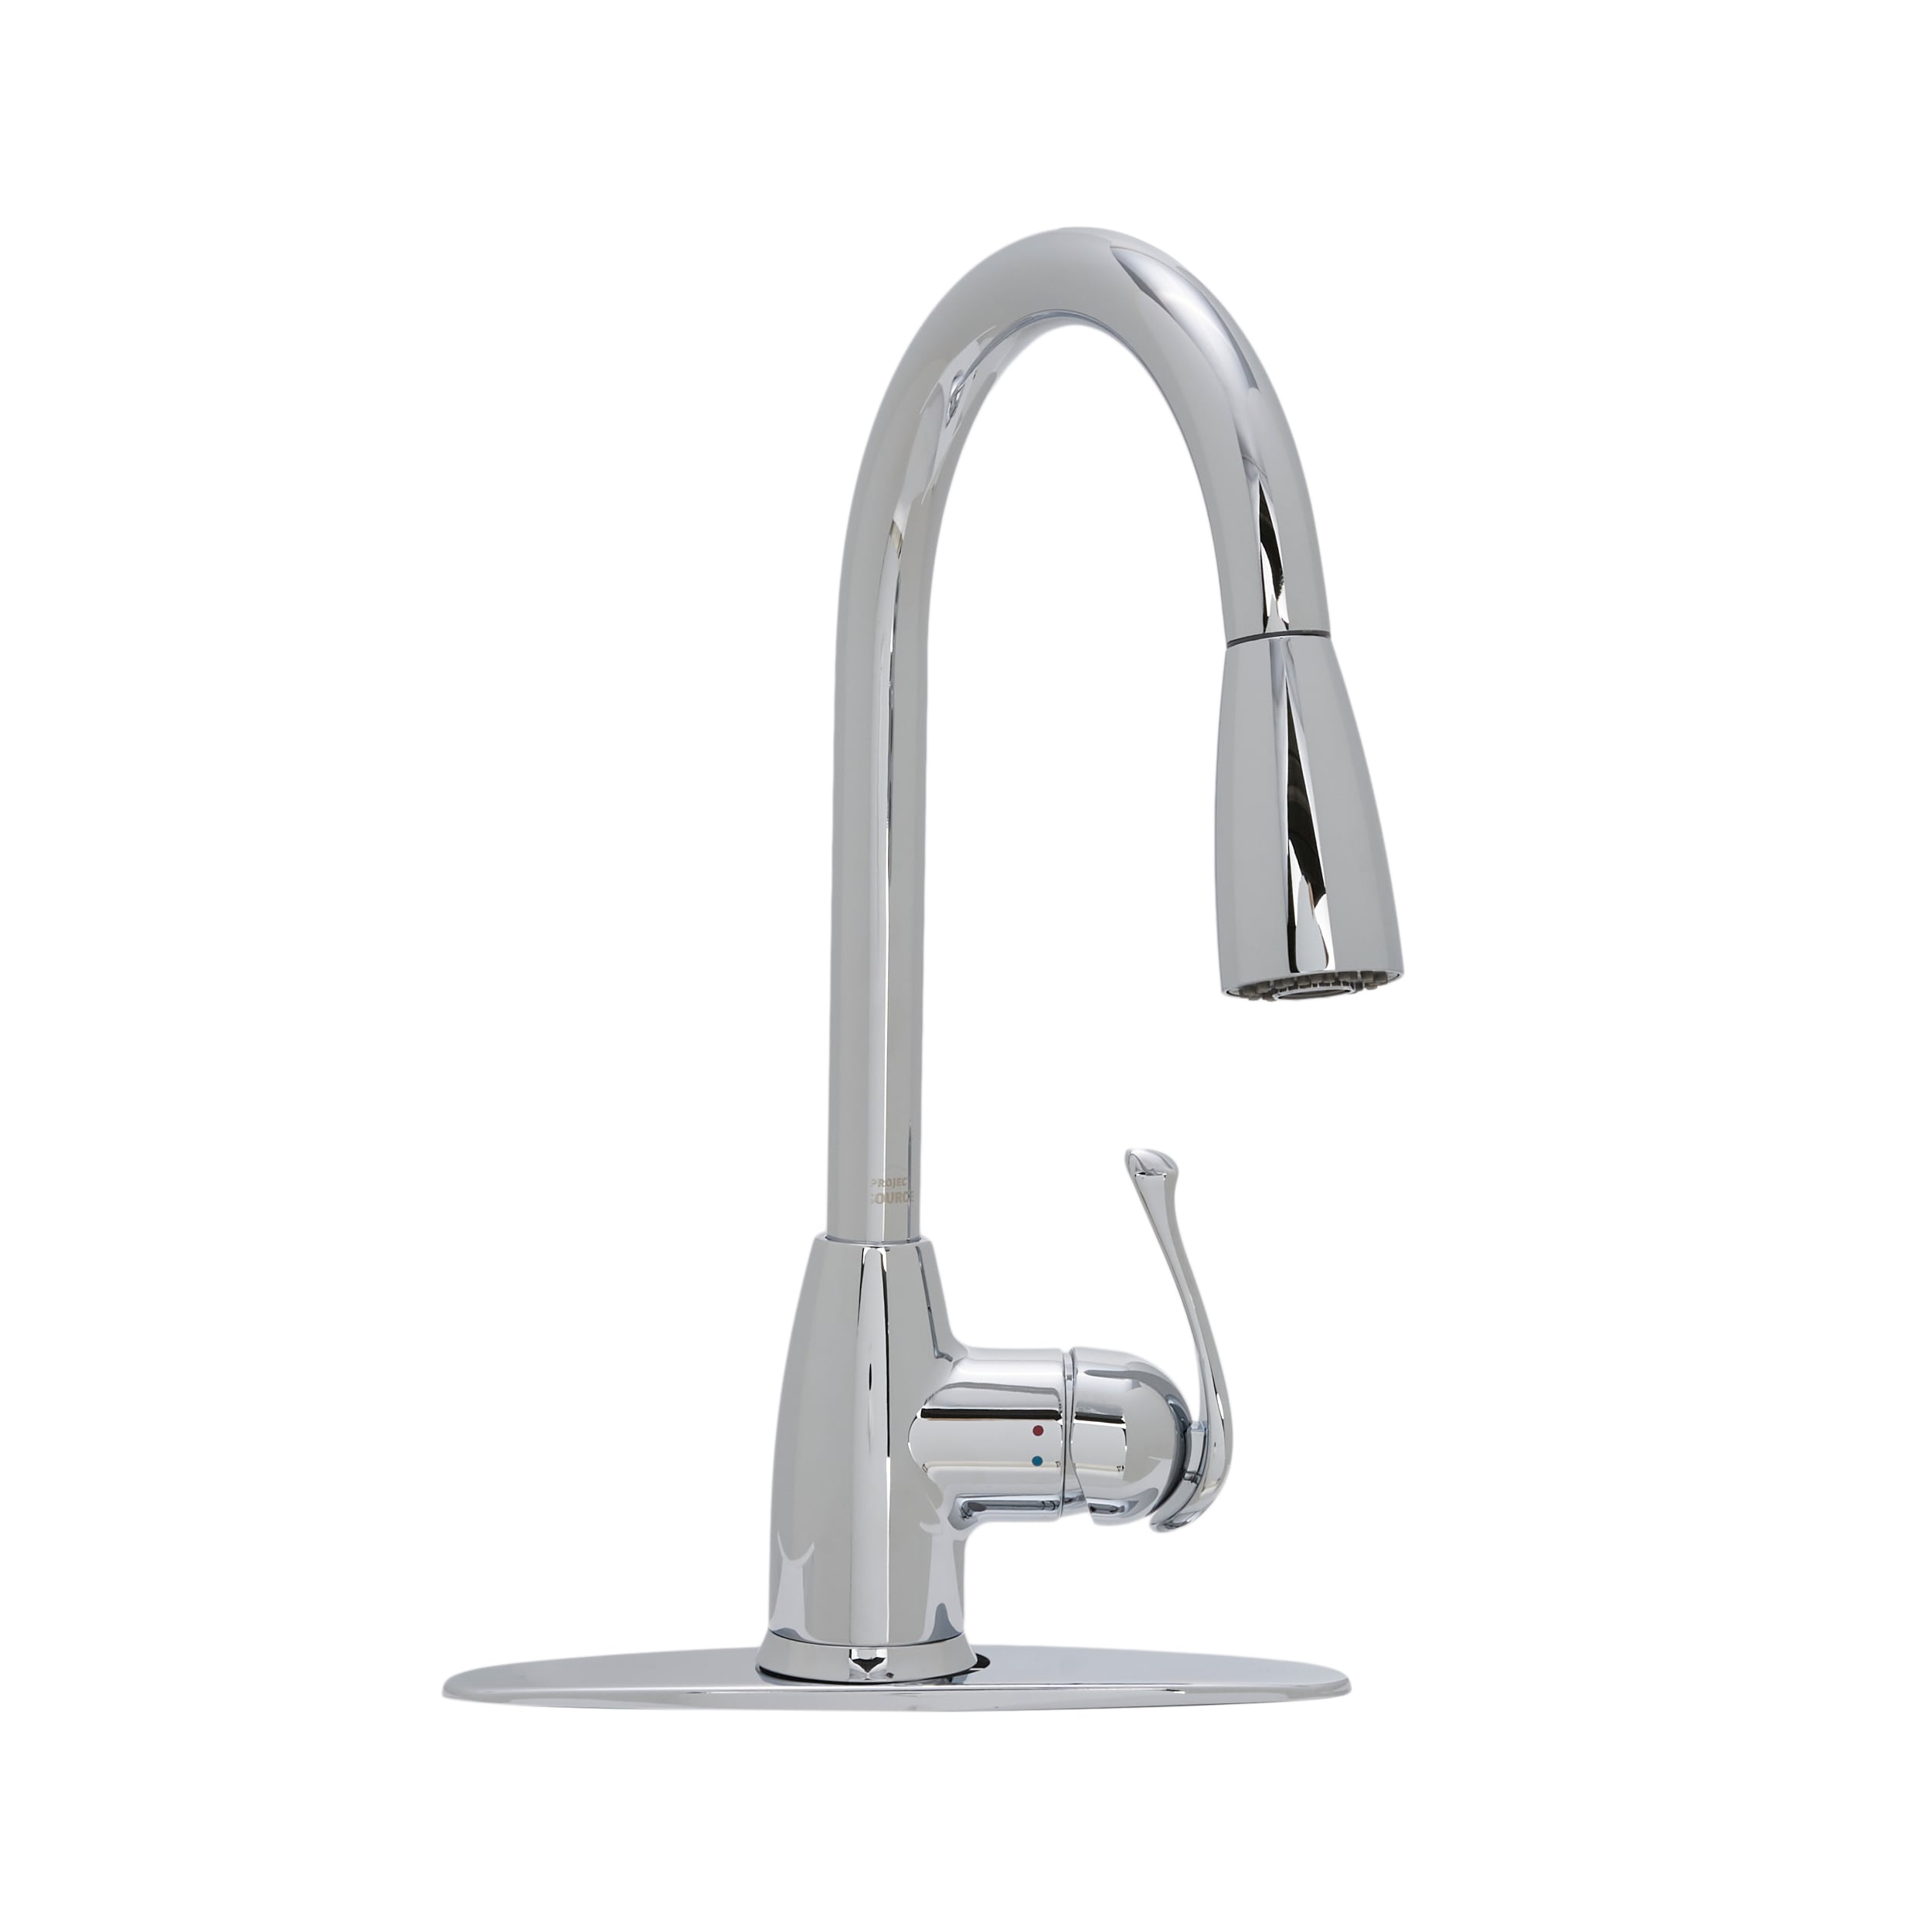 XOXO Kitchen Faucet Pull Out Cold and Hot Brushed Nickel Torneira Rotate  Swivel 2-Function Water Outlet Mixer Tap 1343A-S 1343A-C, 1343A-H, 1343A-S  47,372.84 Smart Device